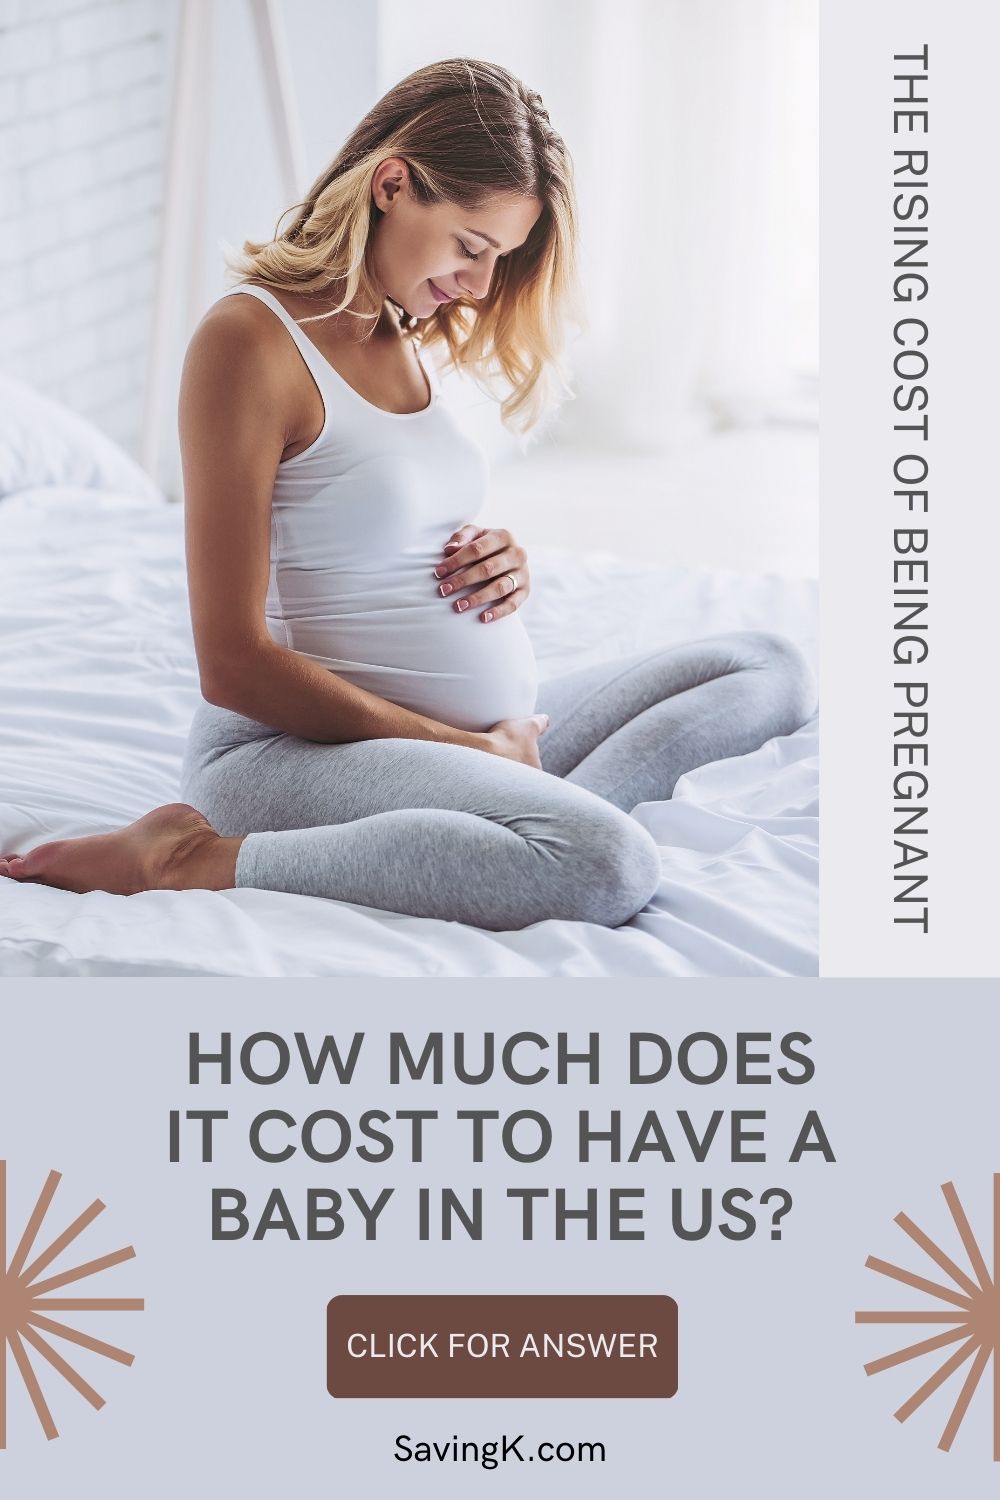 How Much Does It Cost to Have a Baby